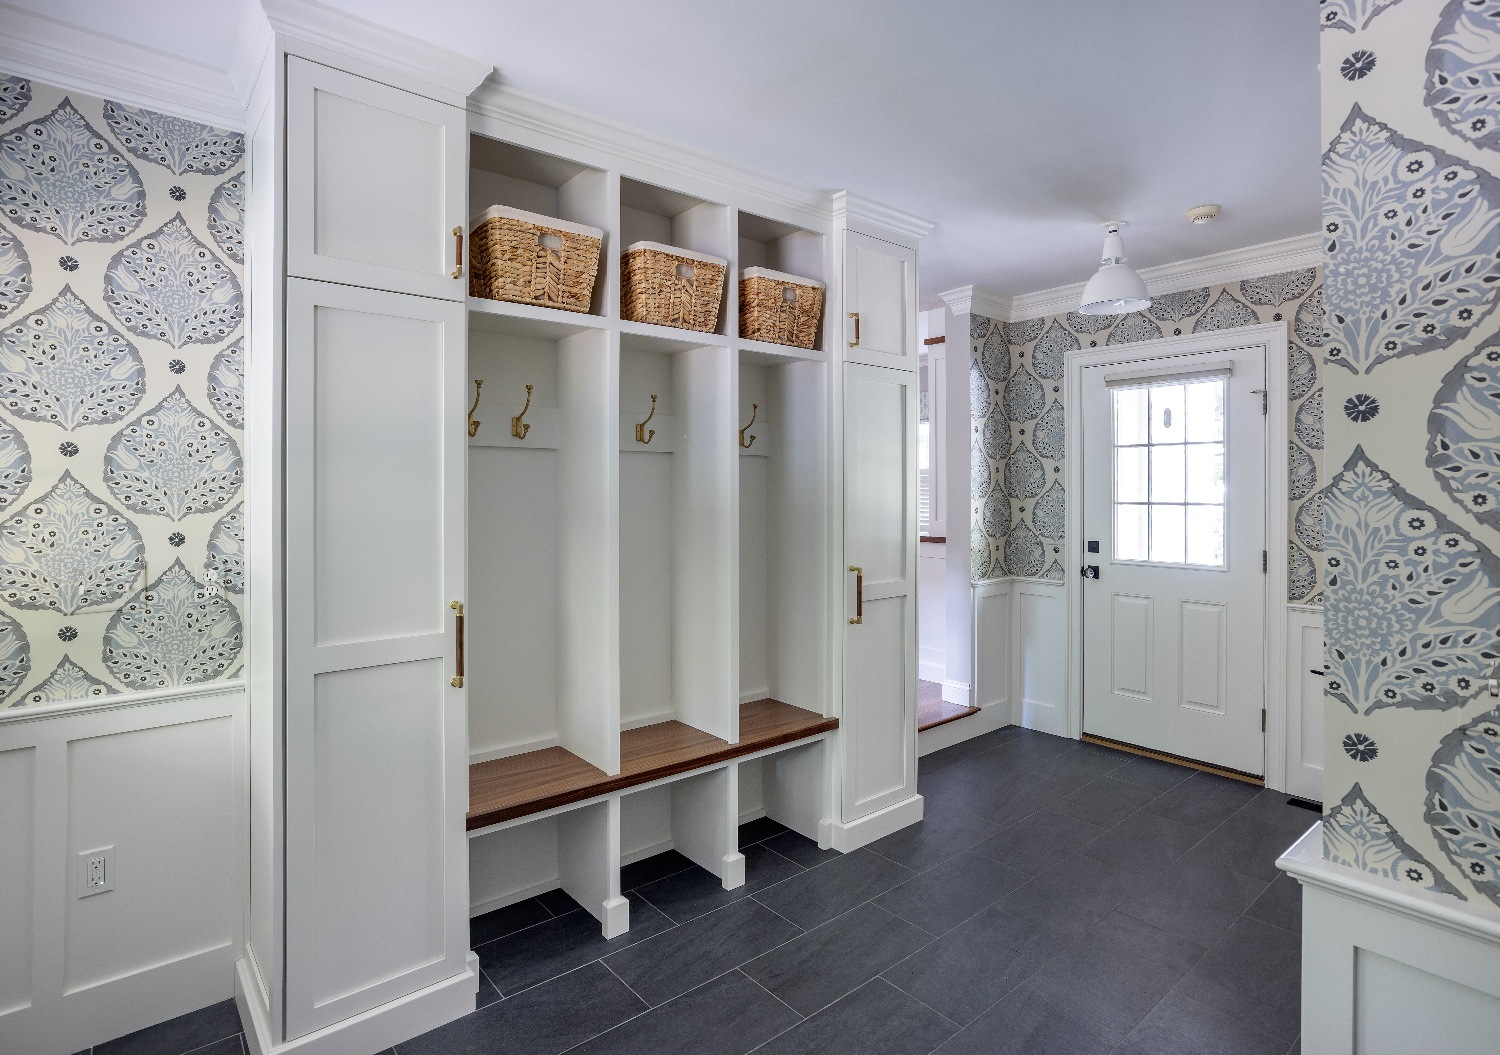 Case Study: From Chaos to Calm - A Mudroom, Laundry Room, and Powder Bath Renovation